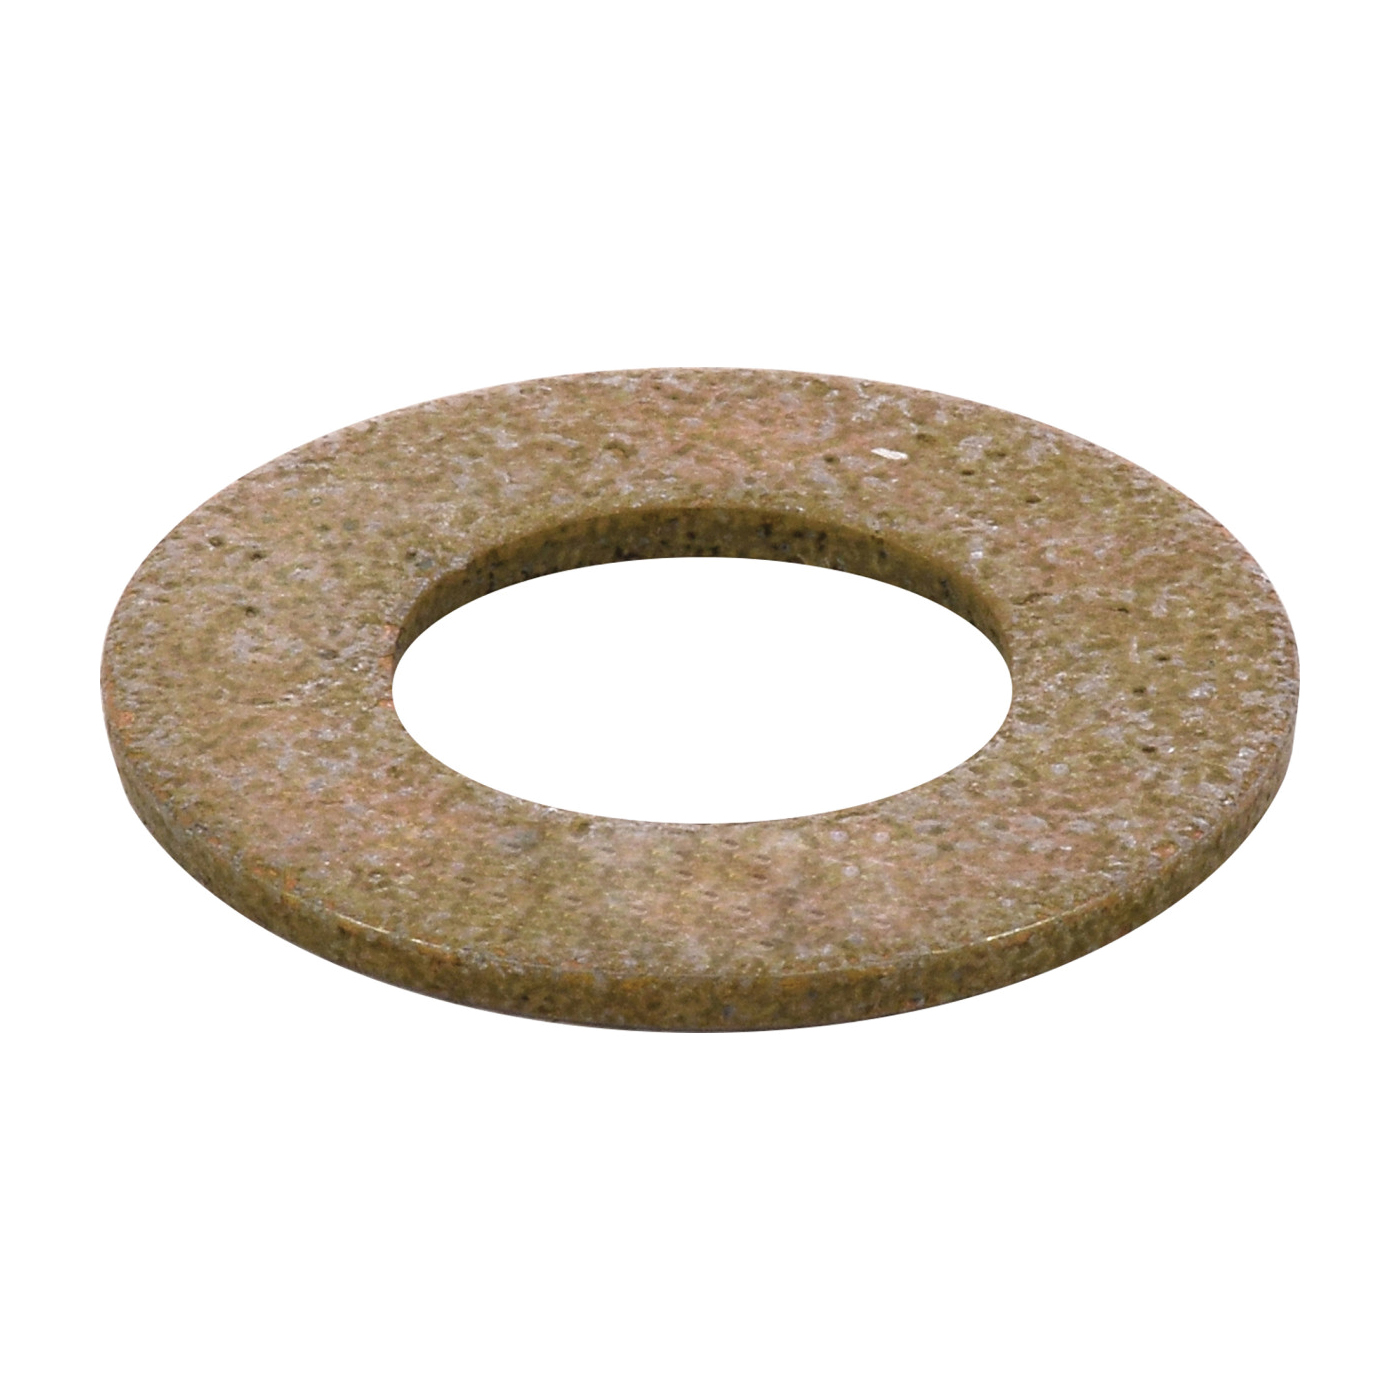 880252 Washer, 5/16 in ID, 8 Grade